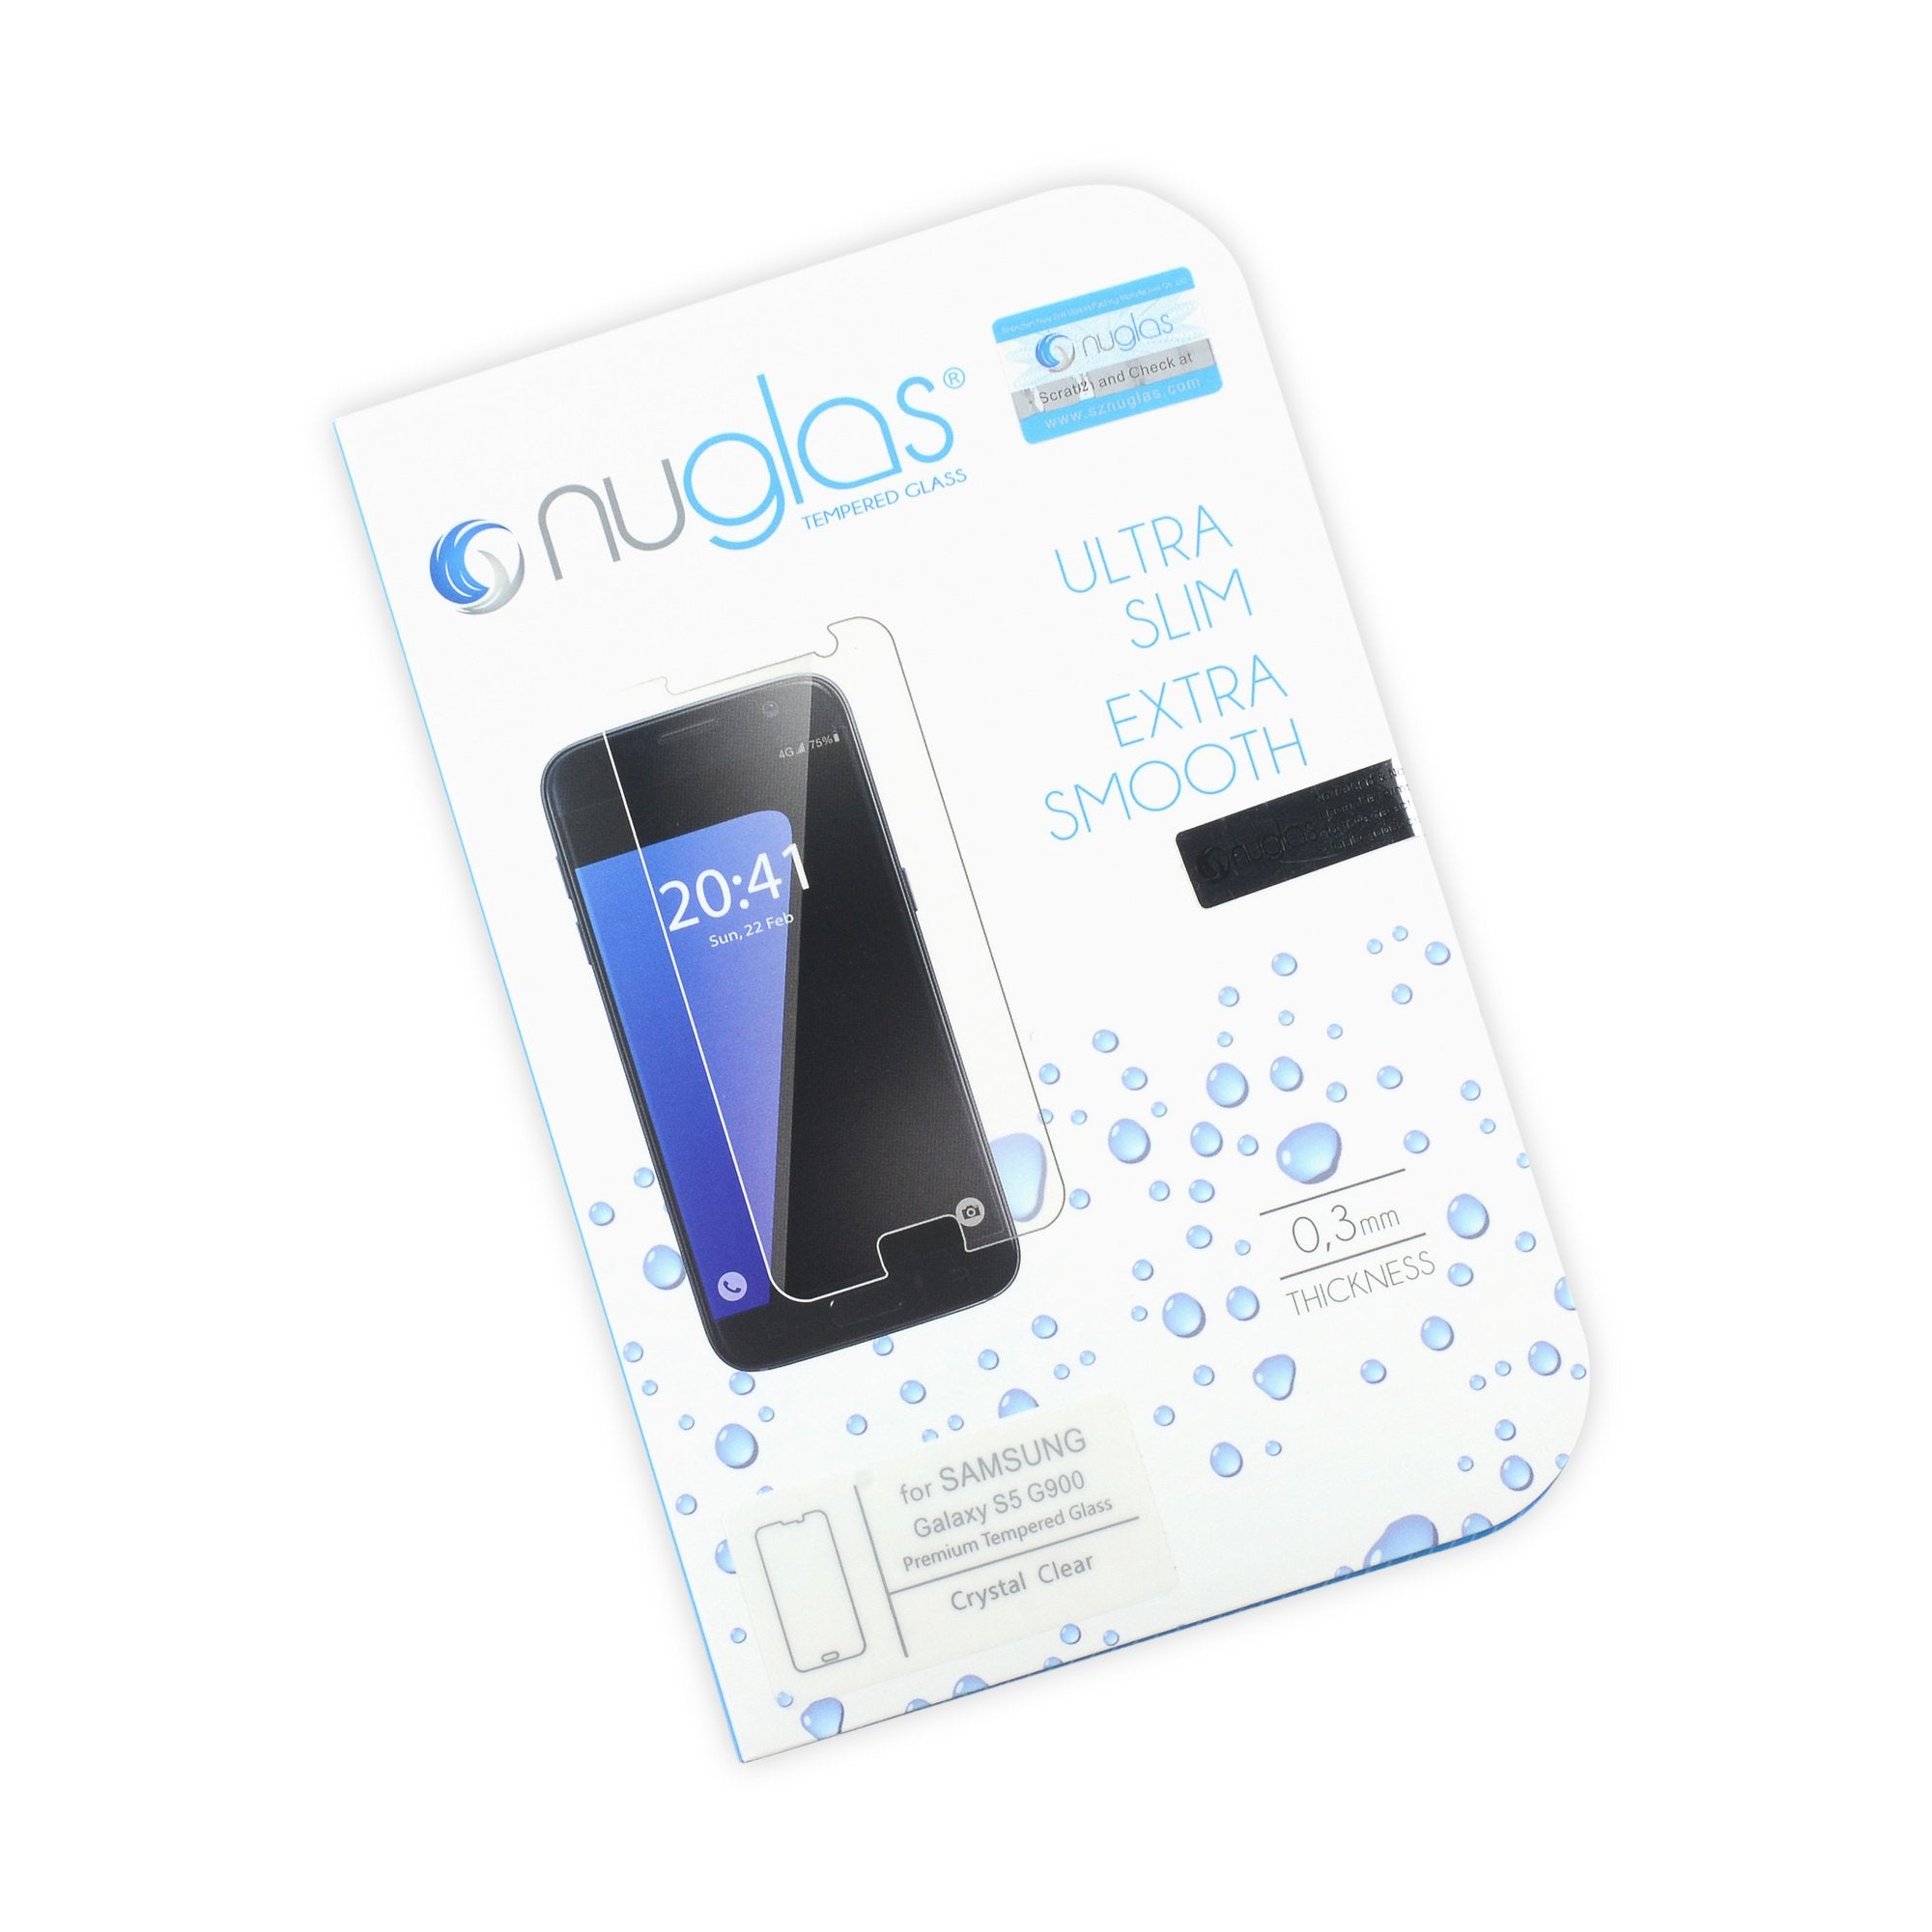 NuGlas Tempered Glass Screen Protector for Galaxy S5